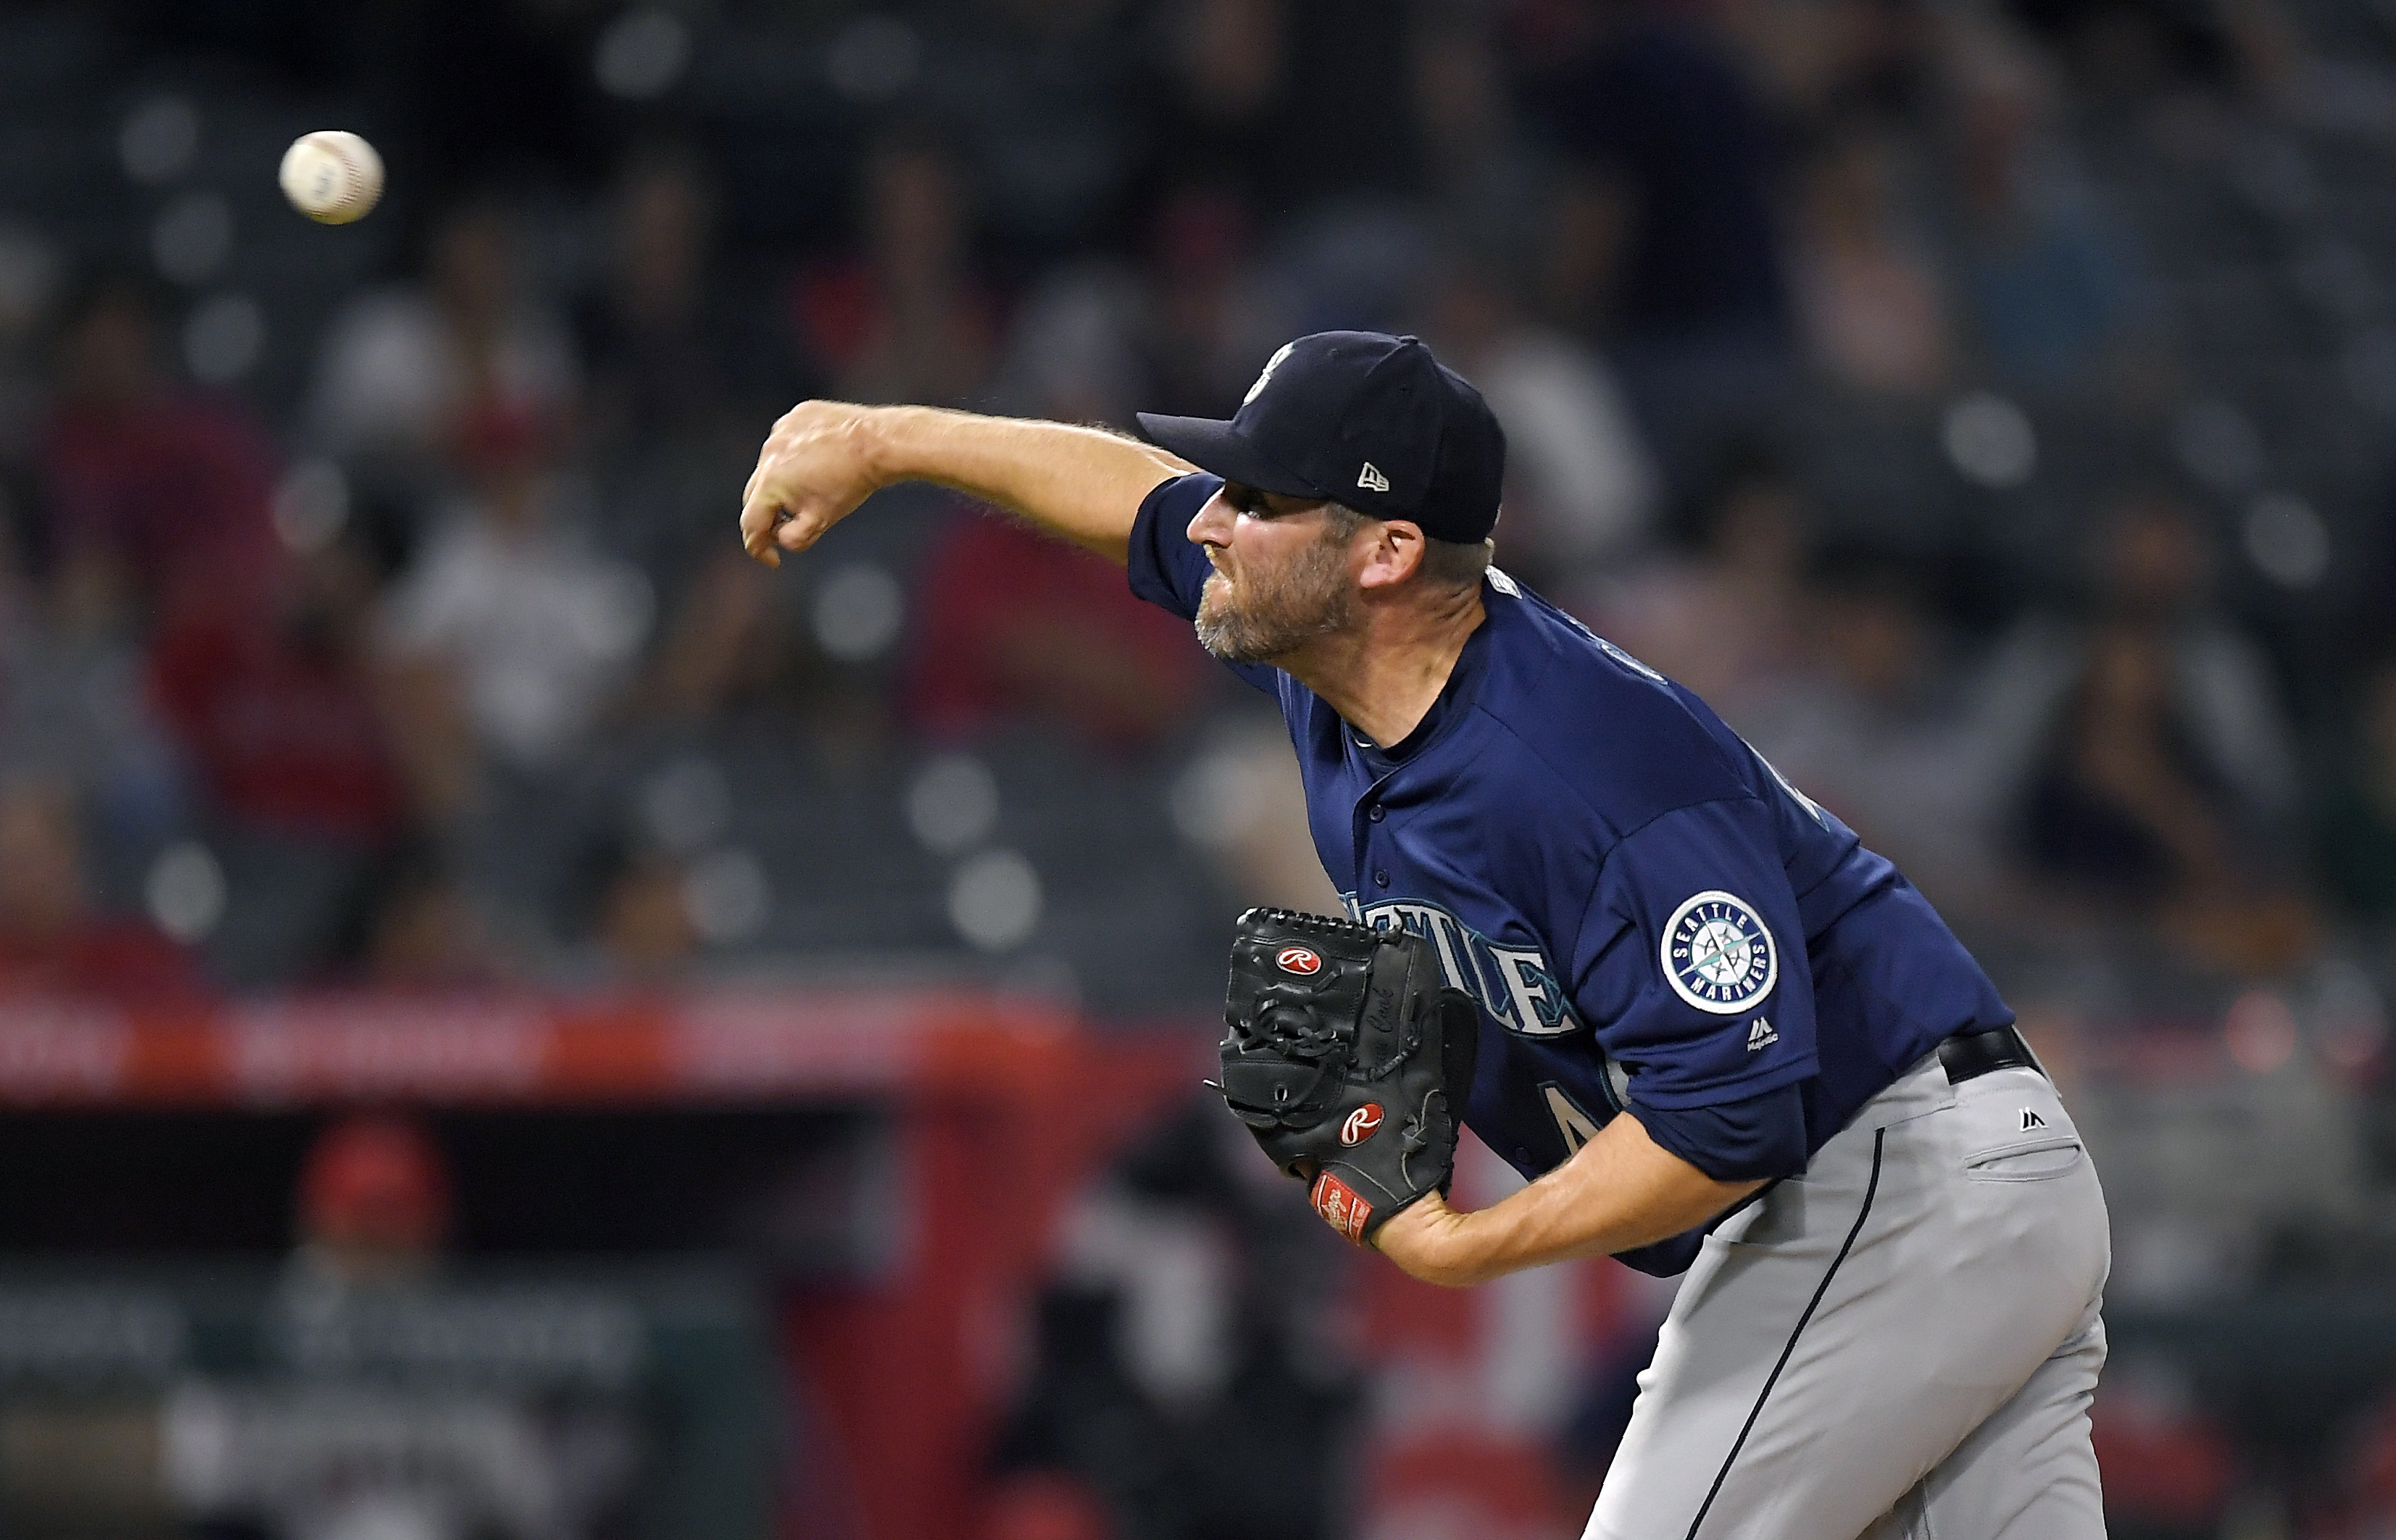 6 Mariners relievers combine to blank Angels 5-0